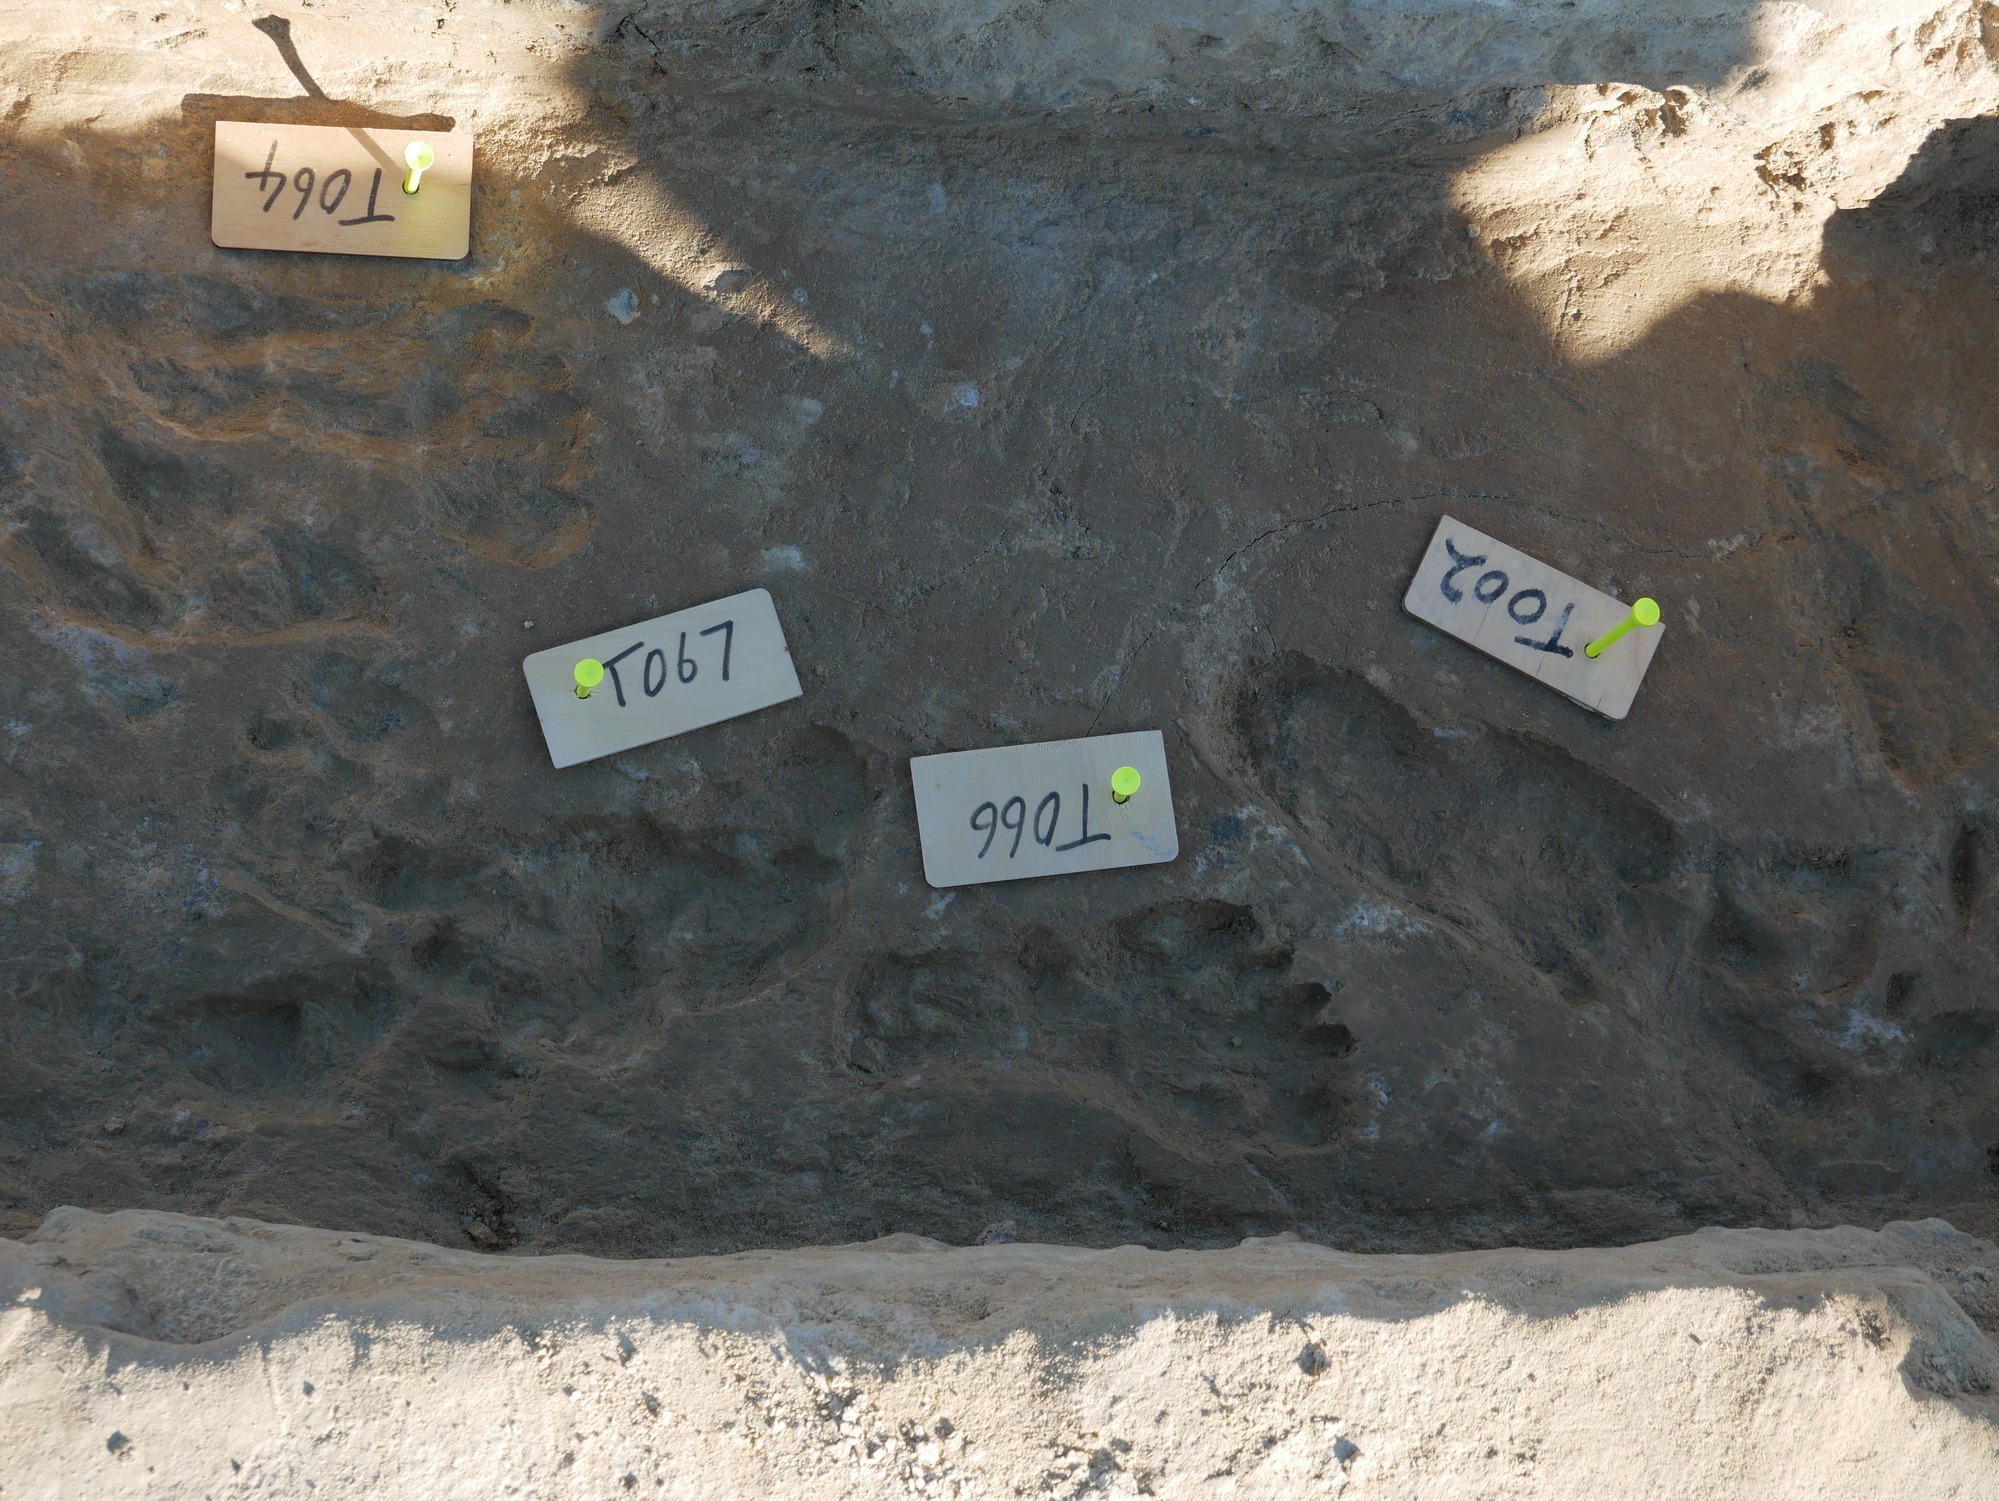 A trench dug-out to demonstrate the sedimentary layers on the side walls. Perspective taken from inside the trench shows footprints found on multiple levels of trench floor. 